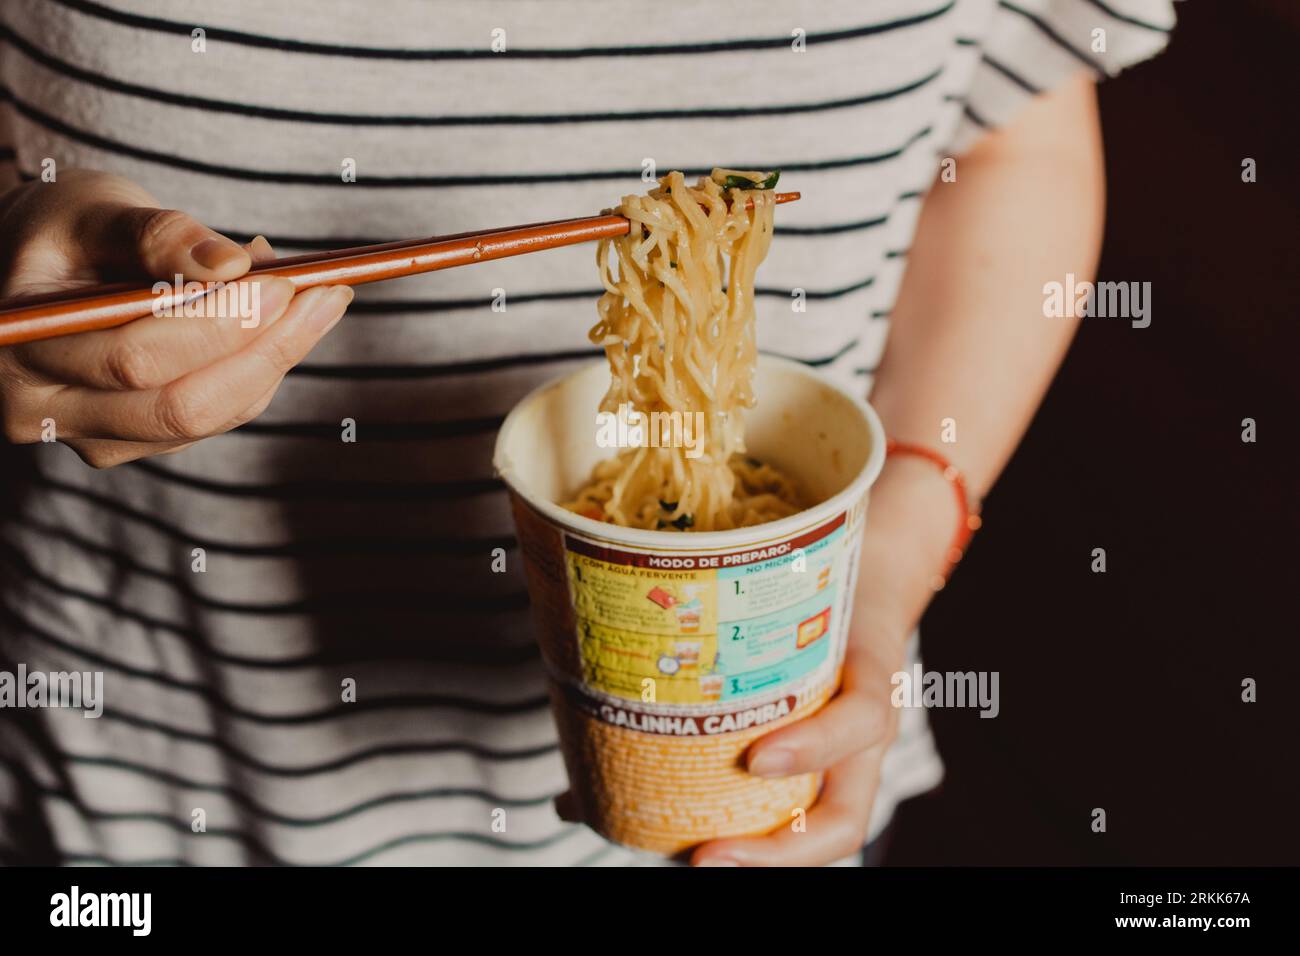 eating cup noodles with chopsticks Stock Photo